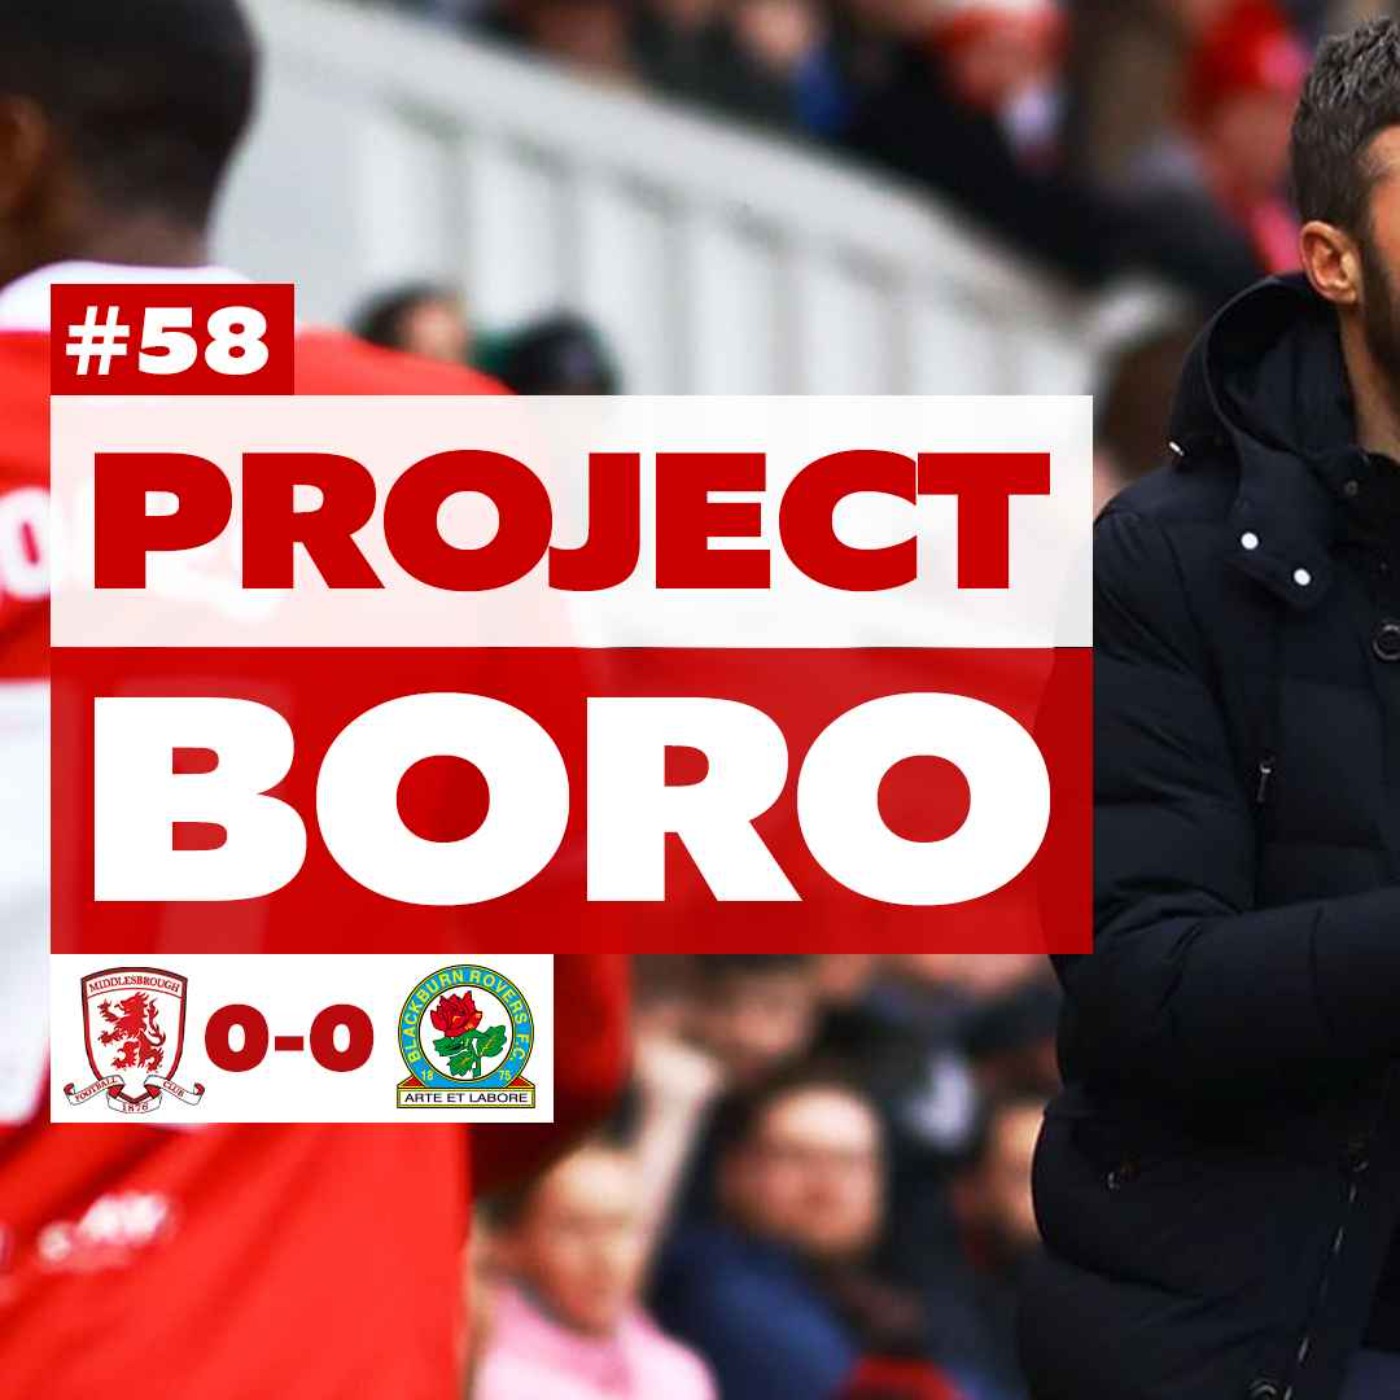 MISSED CHANCES & MORE INJURIES. THE STORY OF OUR SEASON | Middlesbrough 0-0 Blackburn - Project Boro #58